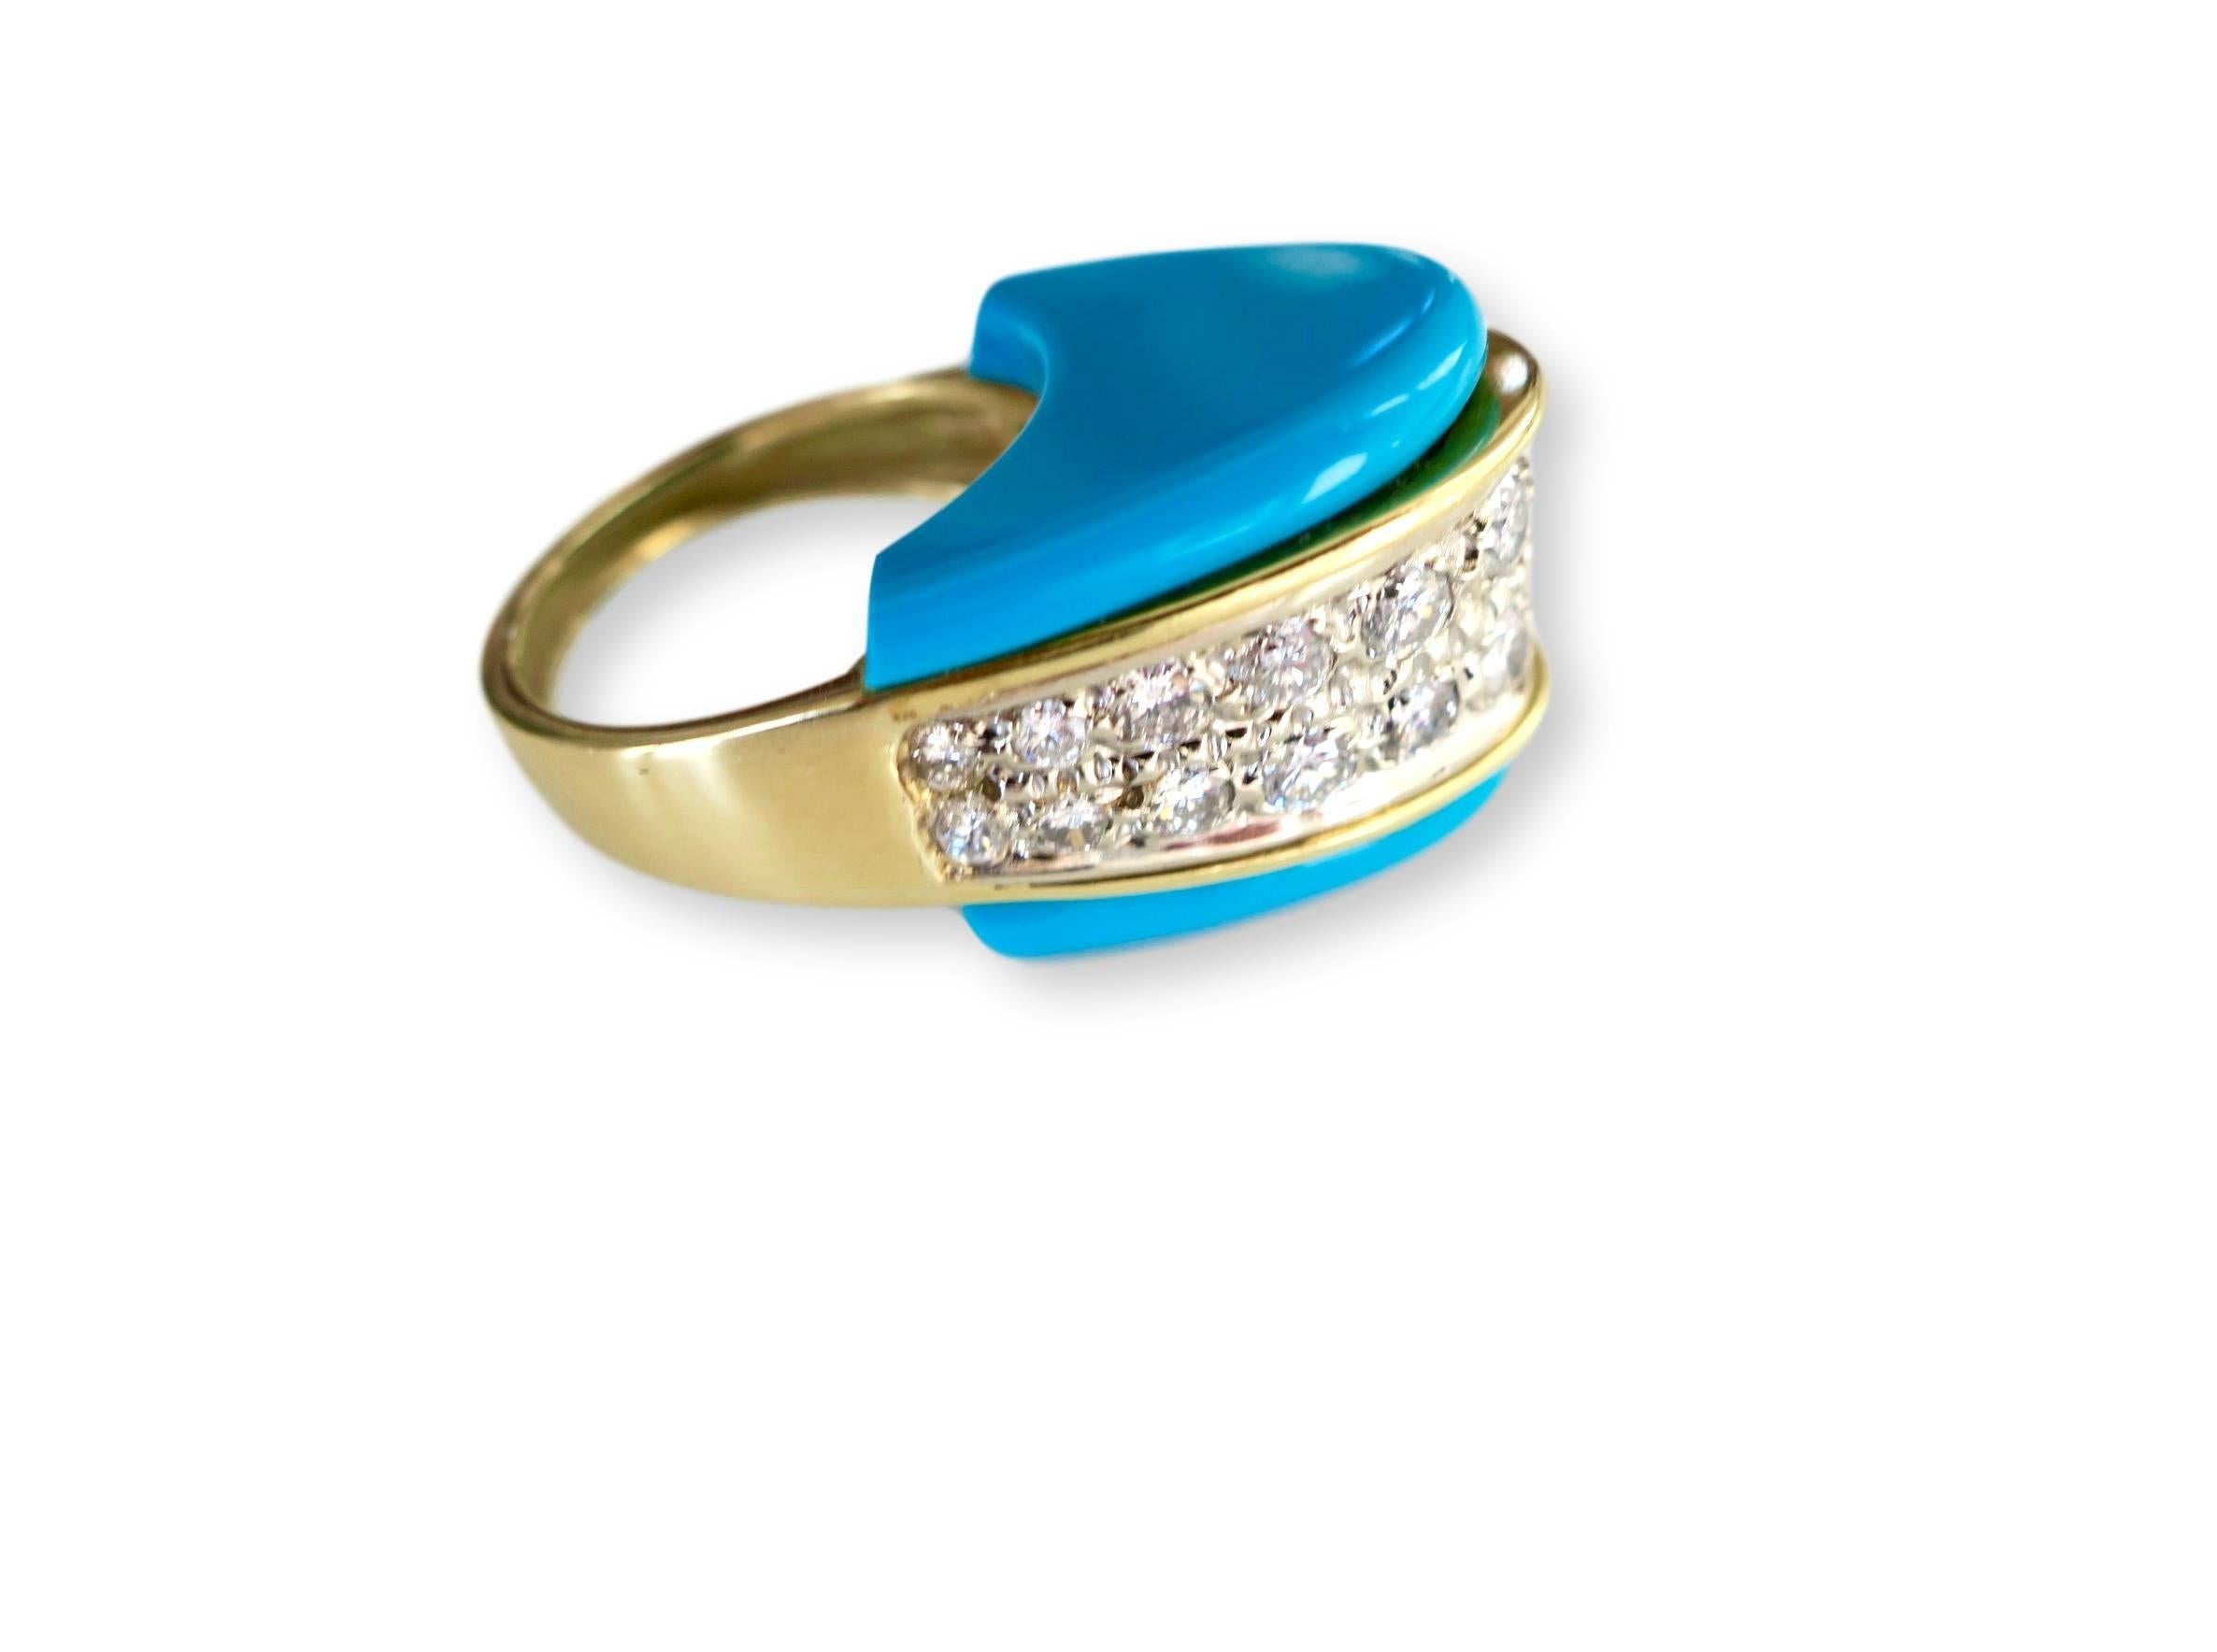 Modernist 1970s Turquoise and Diamond Ring